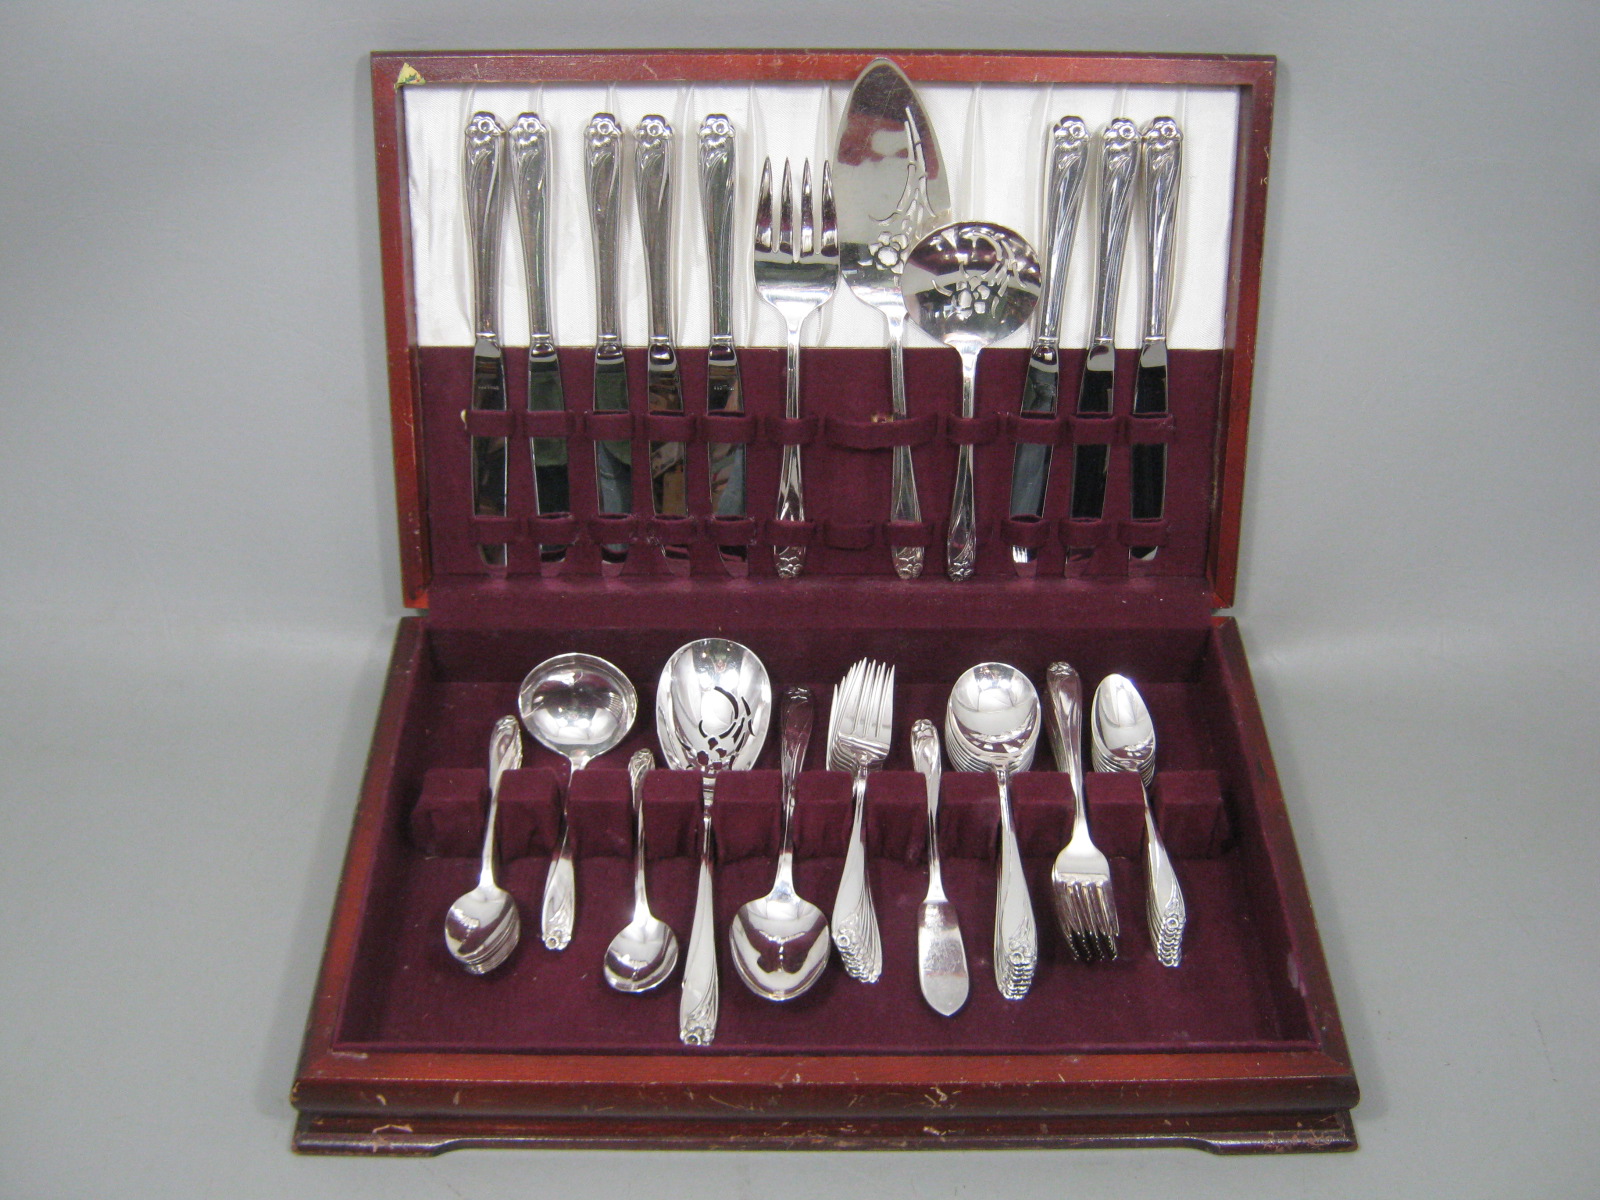 57 Pc 1847 Rogers Bros IS Daffodil Pattern Flatware Service For 8 + Wooden Chest